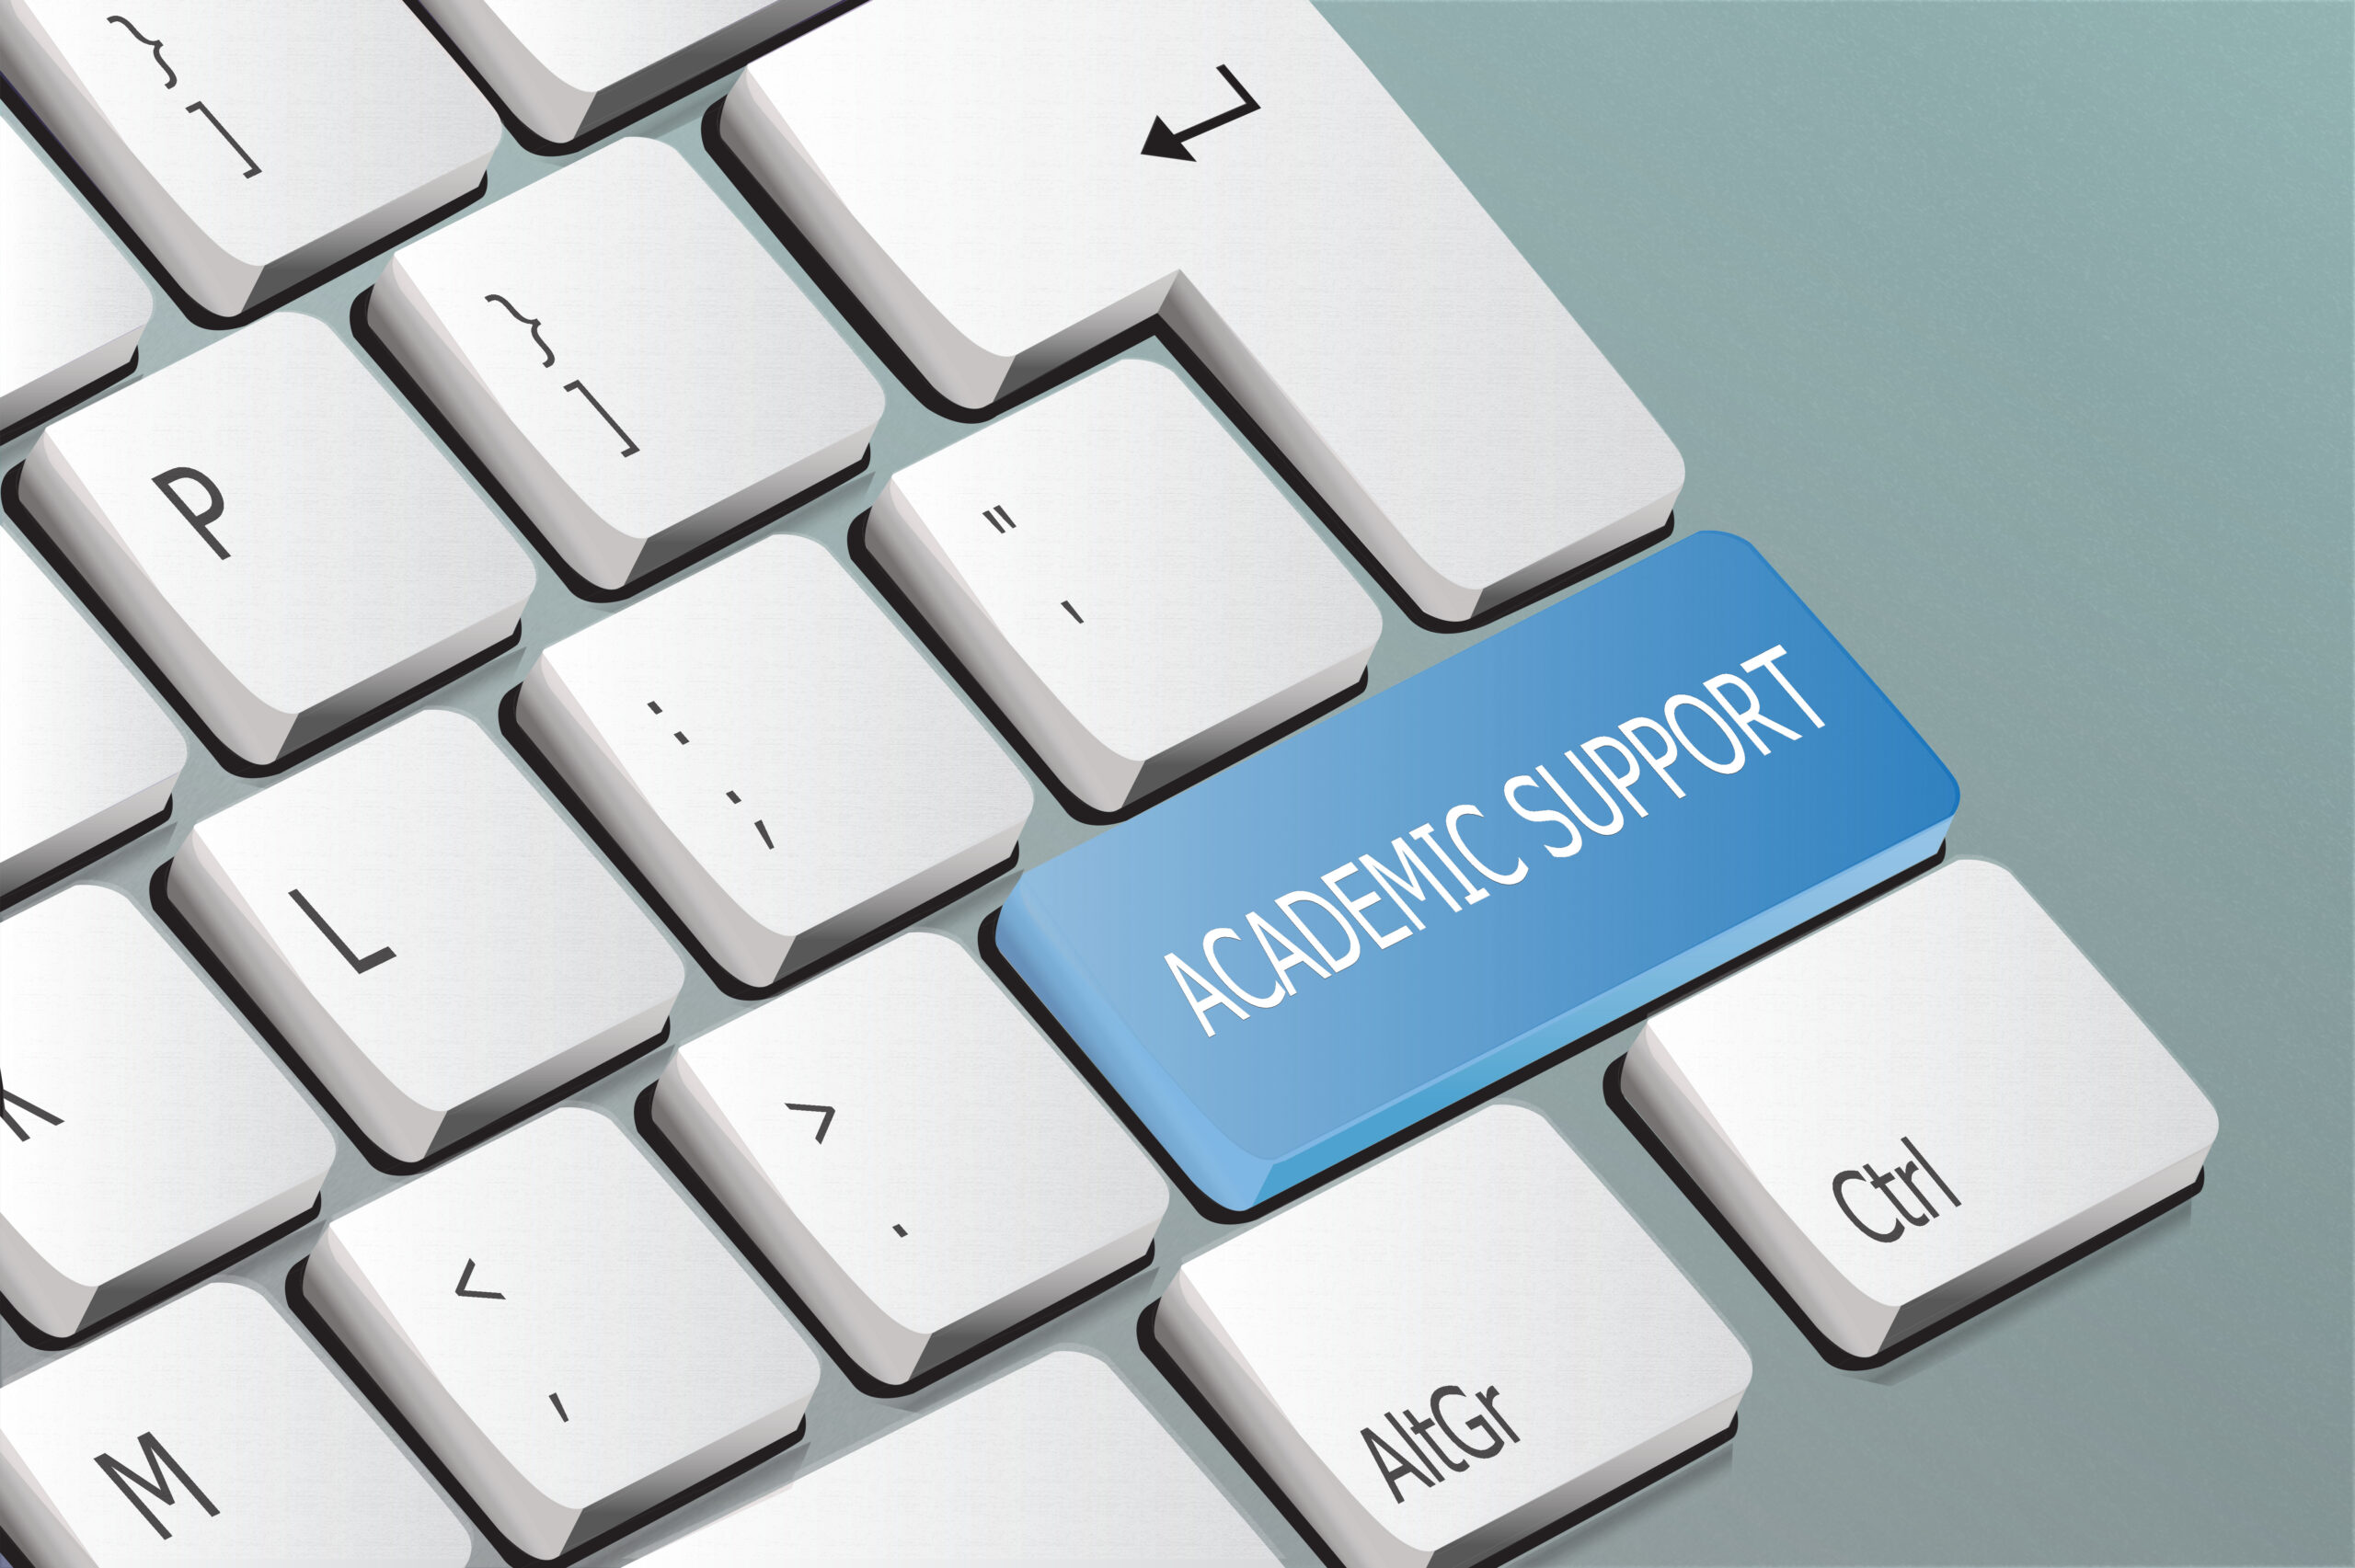 Academic Support written on the keyboard button